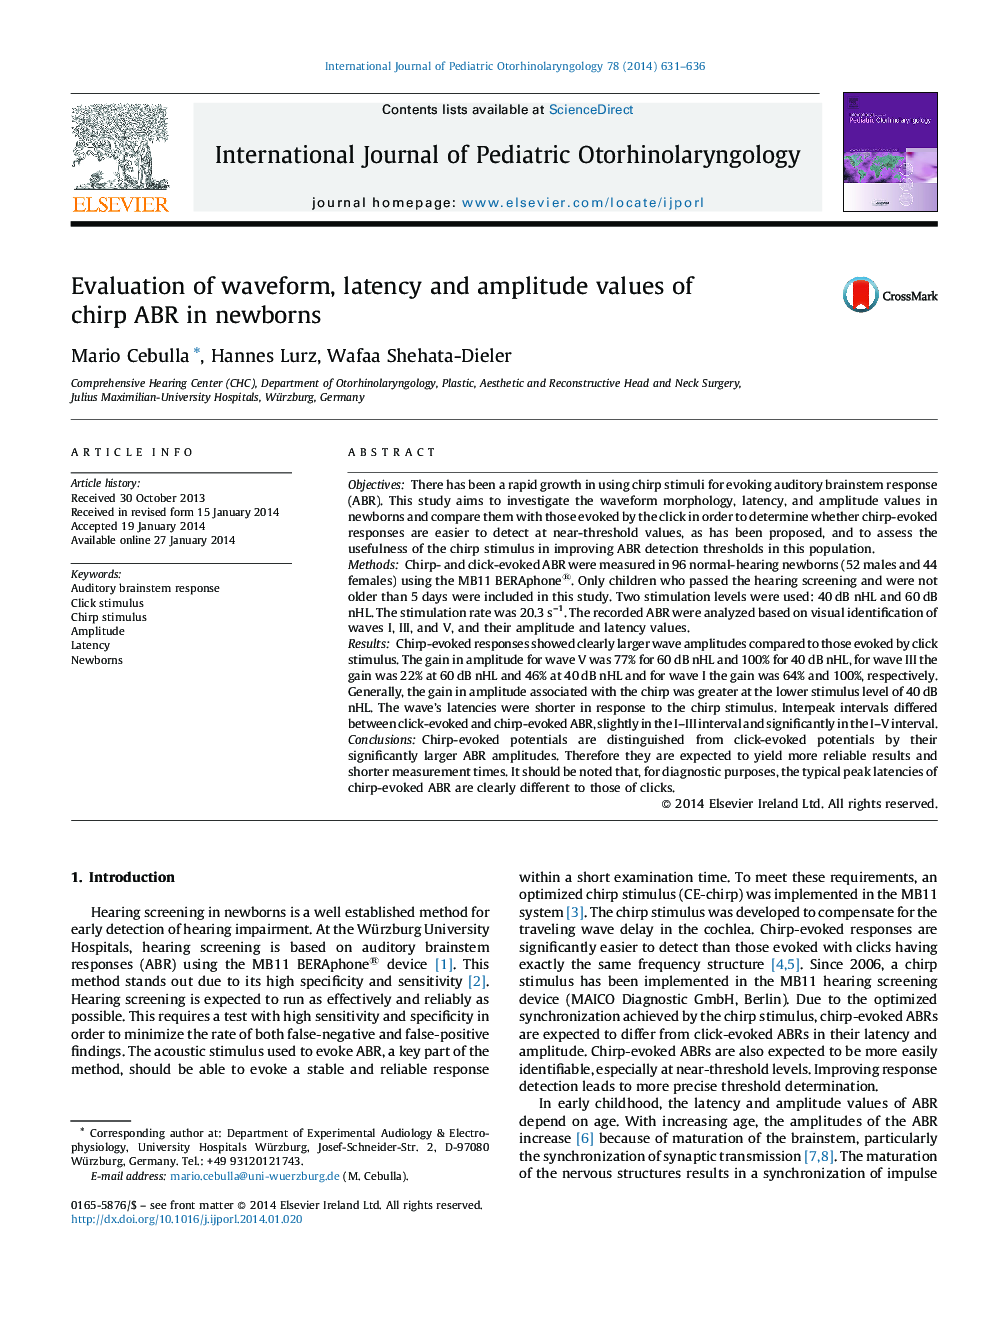 Evaluation of waveform, latency and amplitude values of chirp ABR in newborns